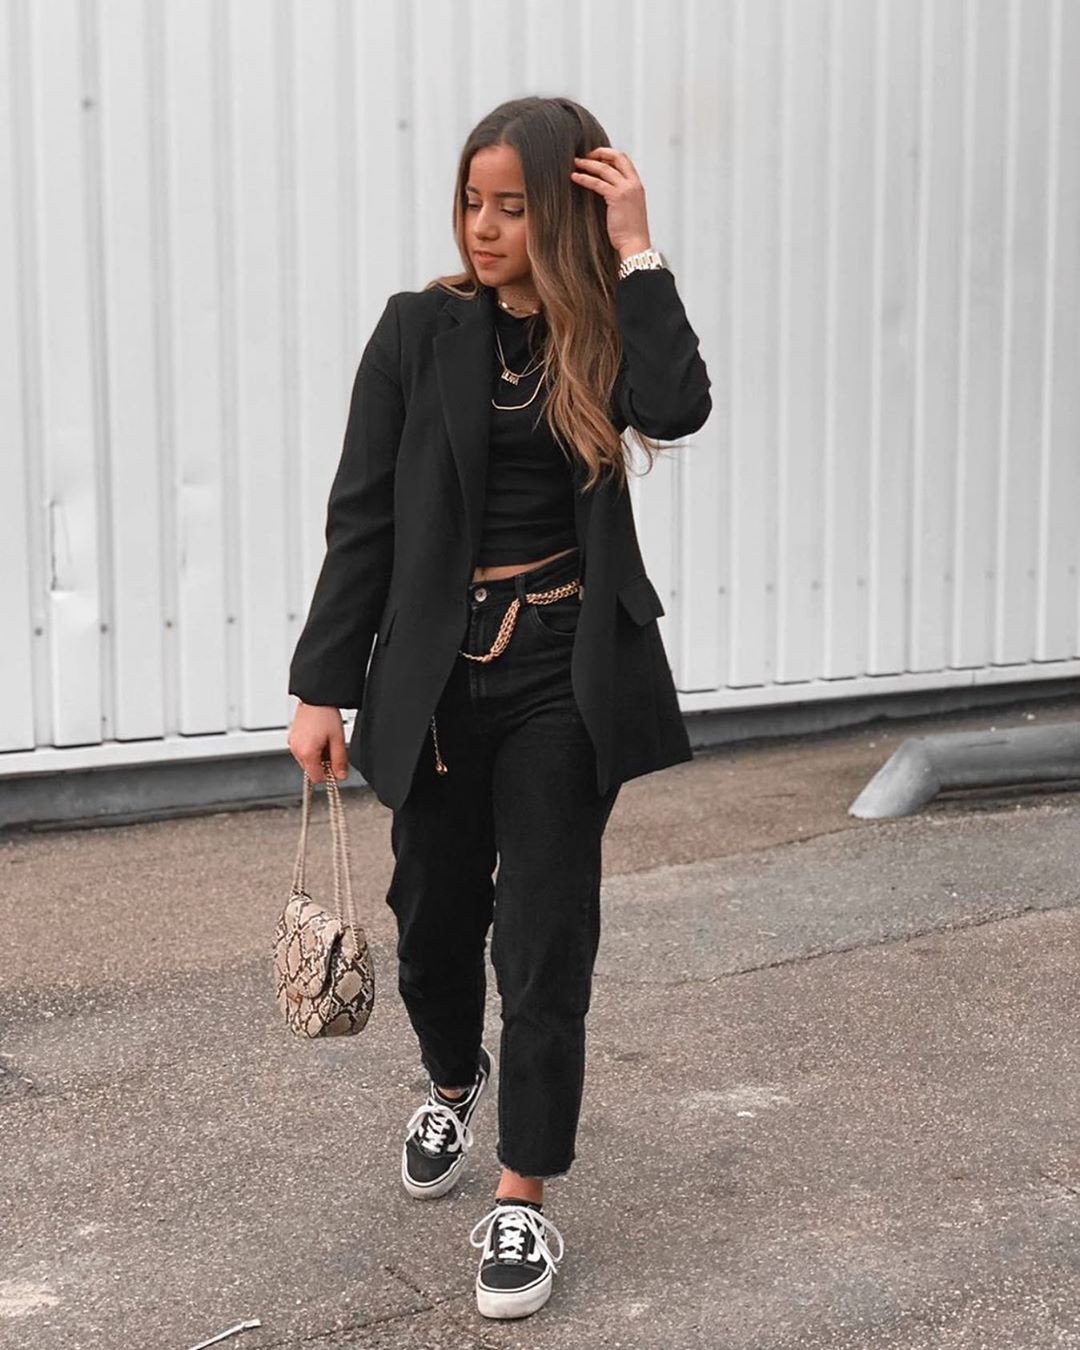 Casual All Black Winter Outfits For Ladies: Beautiful Girls,  winter outfits,  FASHION,  Outfit Ideas,  Fashion week,  Love,  White Outfit,  fashioninsta,  sunday,  grey,  Cool Fashion,  Winter Outfit Ideas,  Cute Winter Outfits,  Winter Casual,  Classy Winter Dresses  